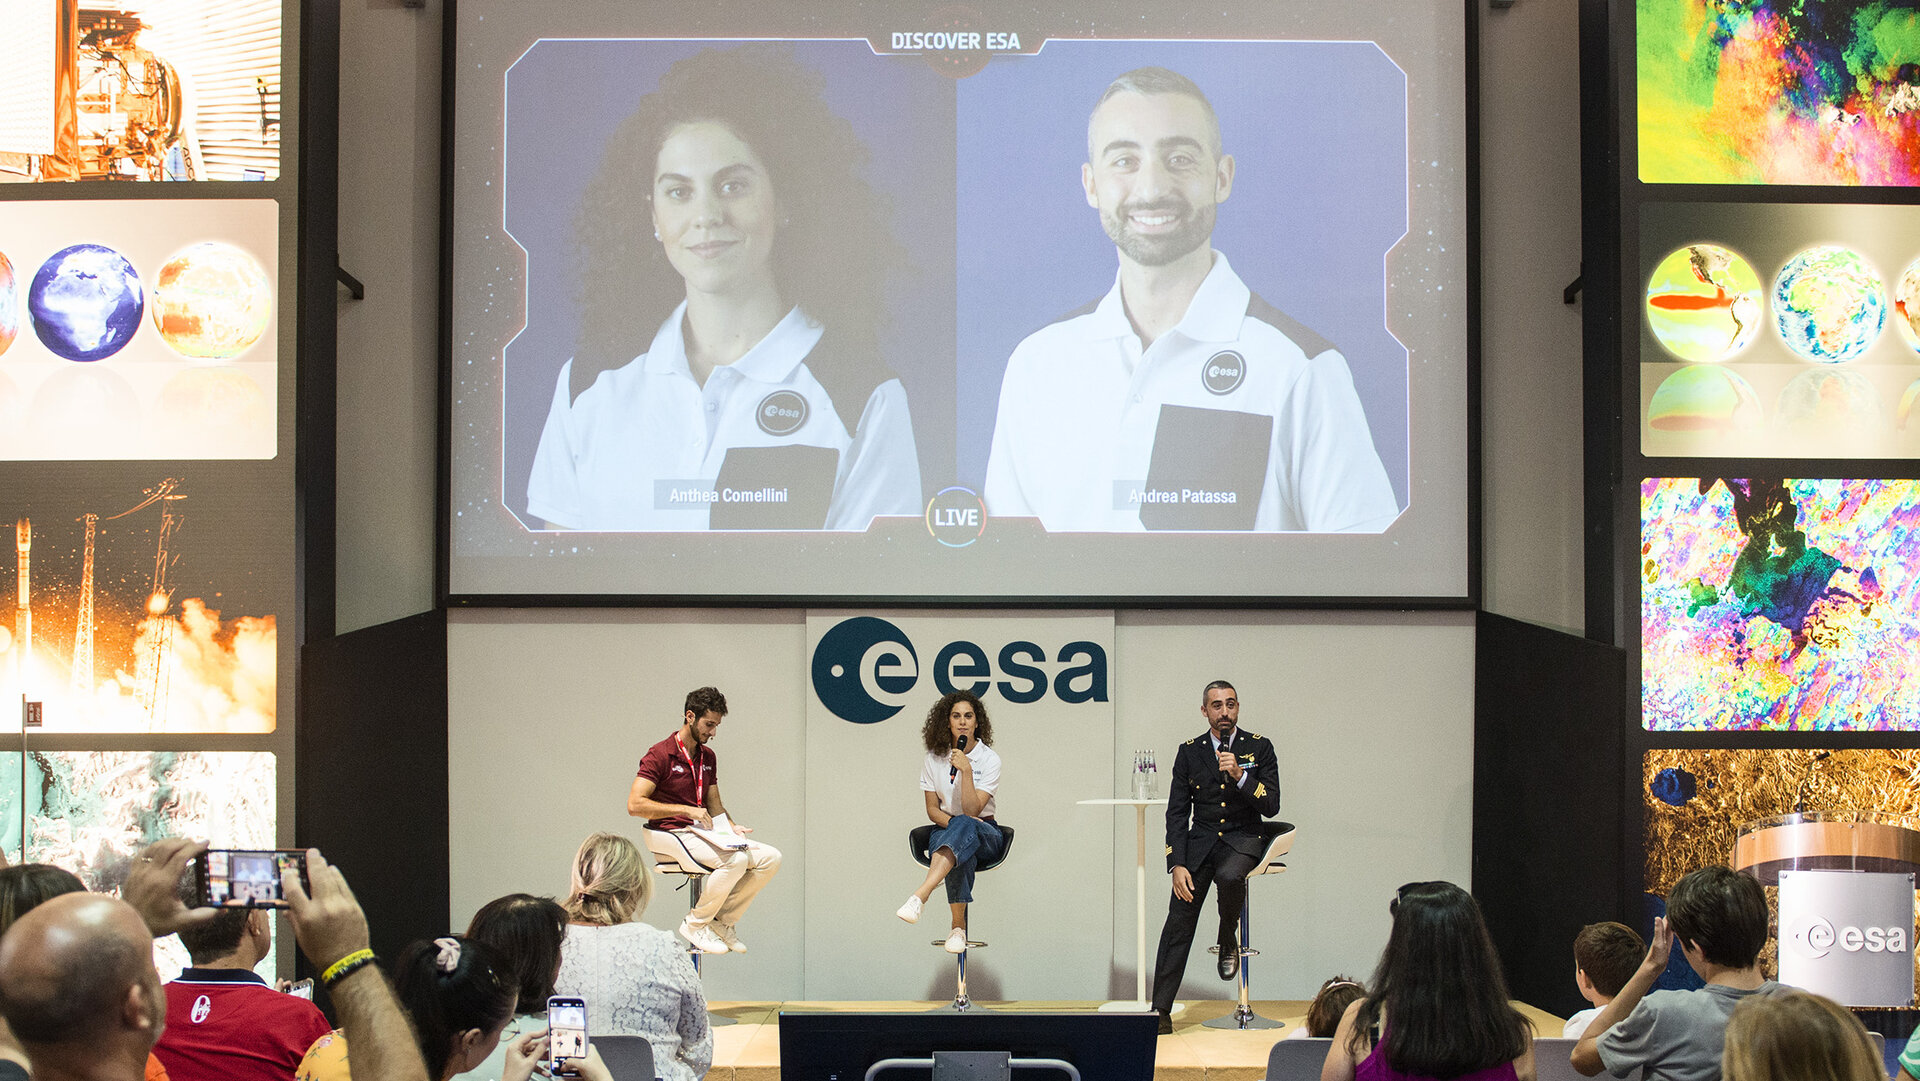 ESA Open Day 2023 at ESRIN: Anthea Comellini and Andrea Patassa, Members of the Astronaut Reserve